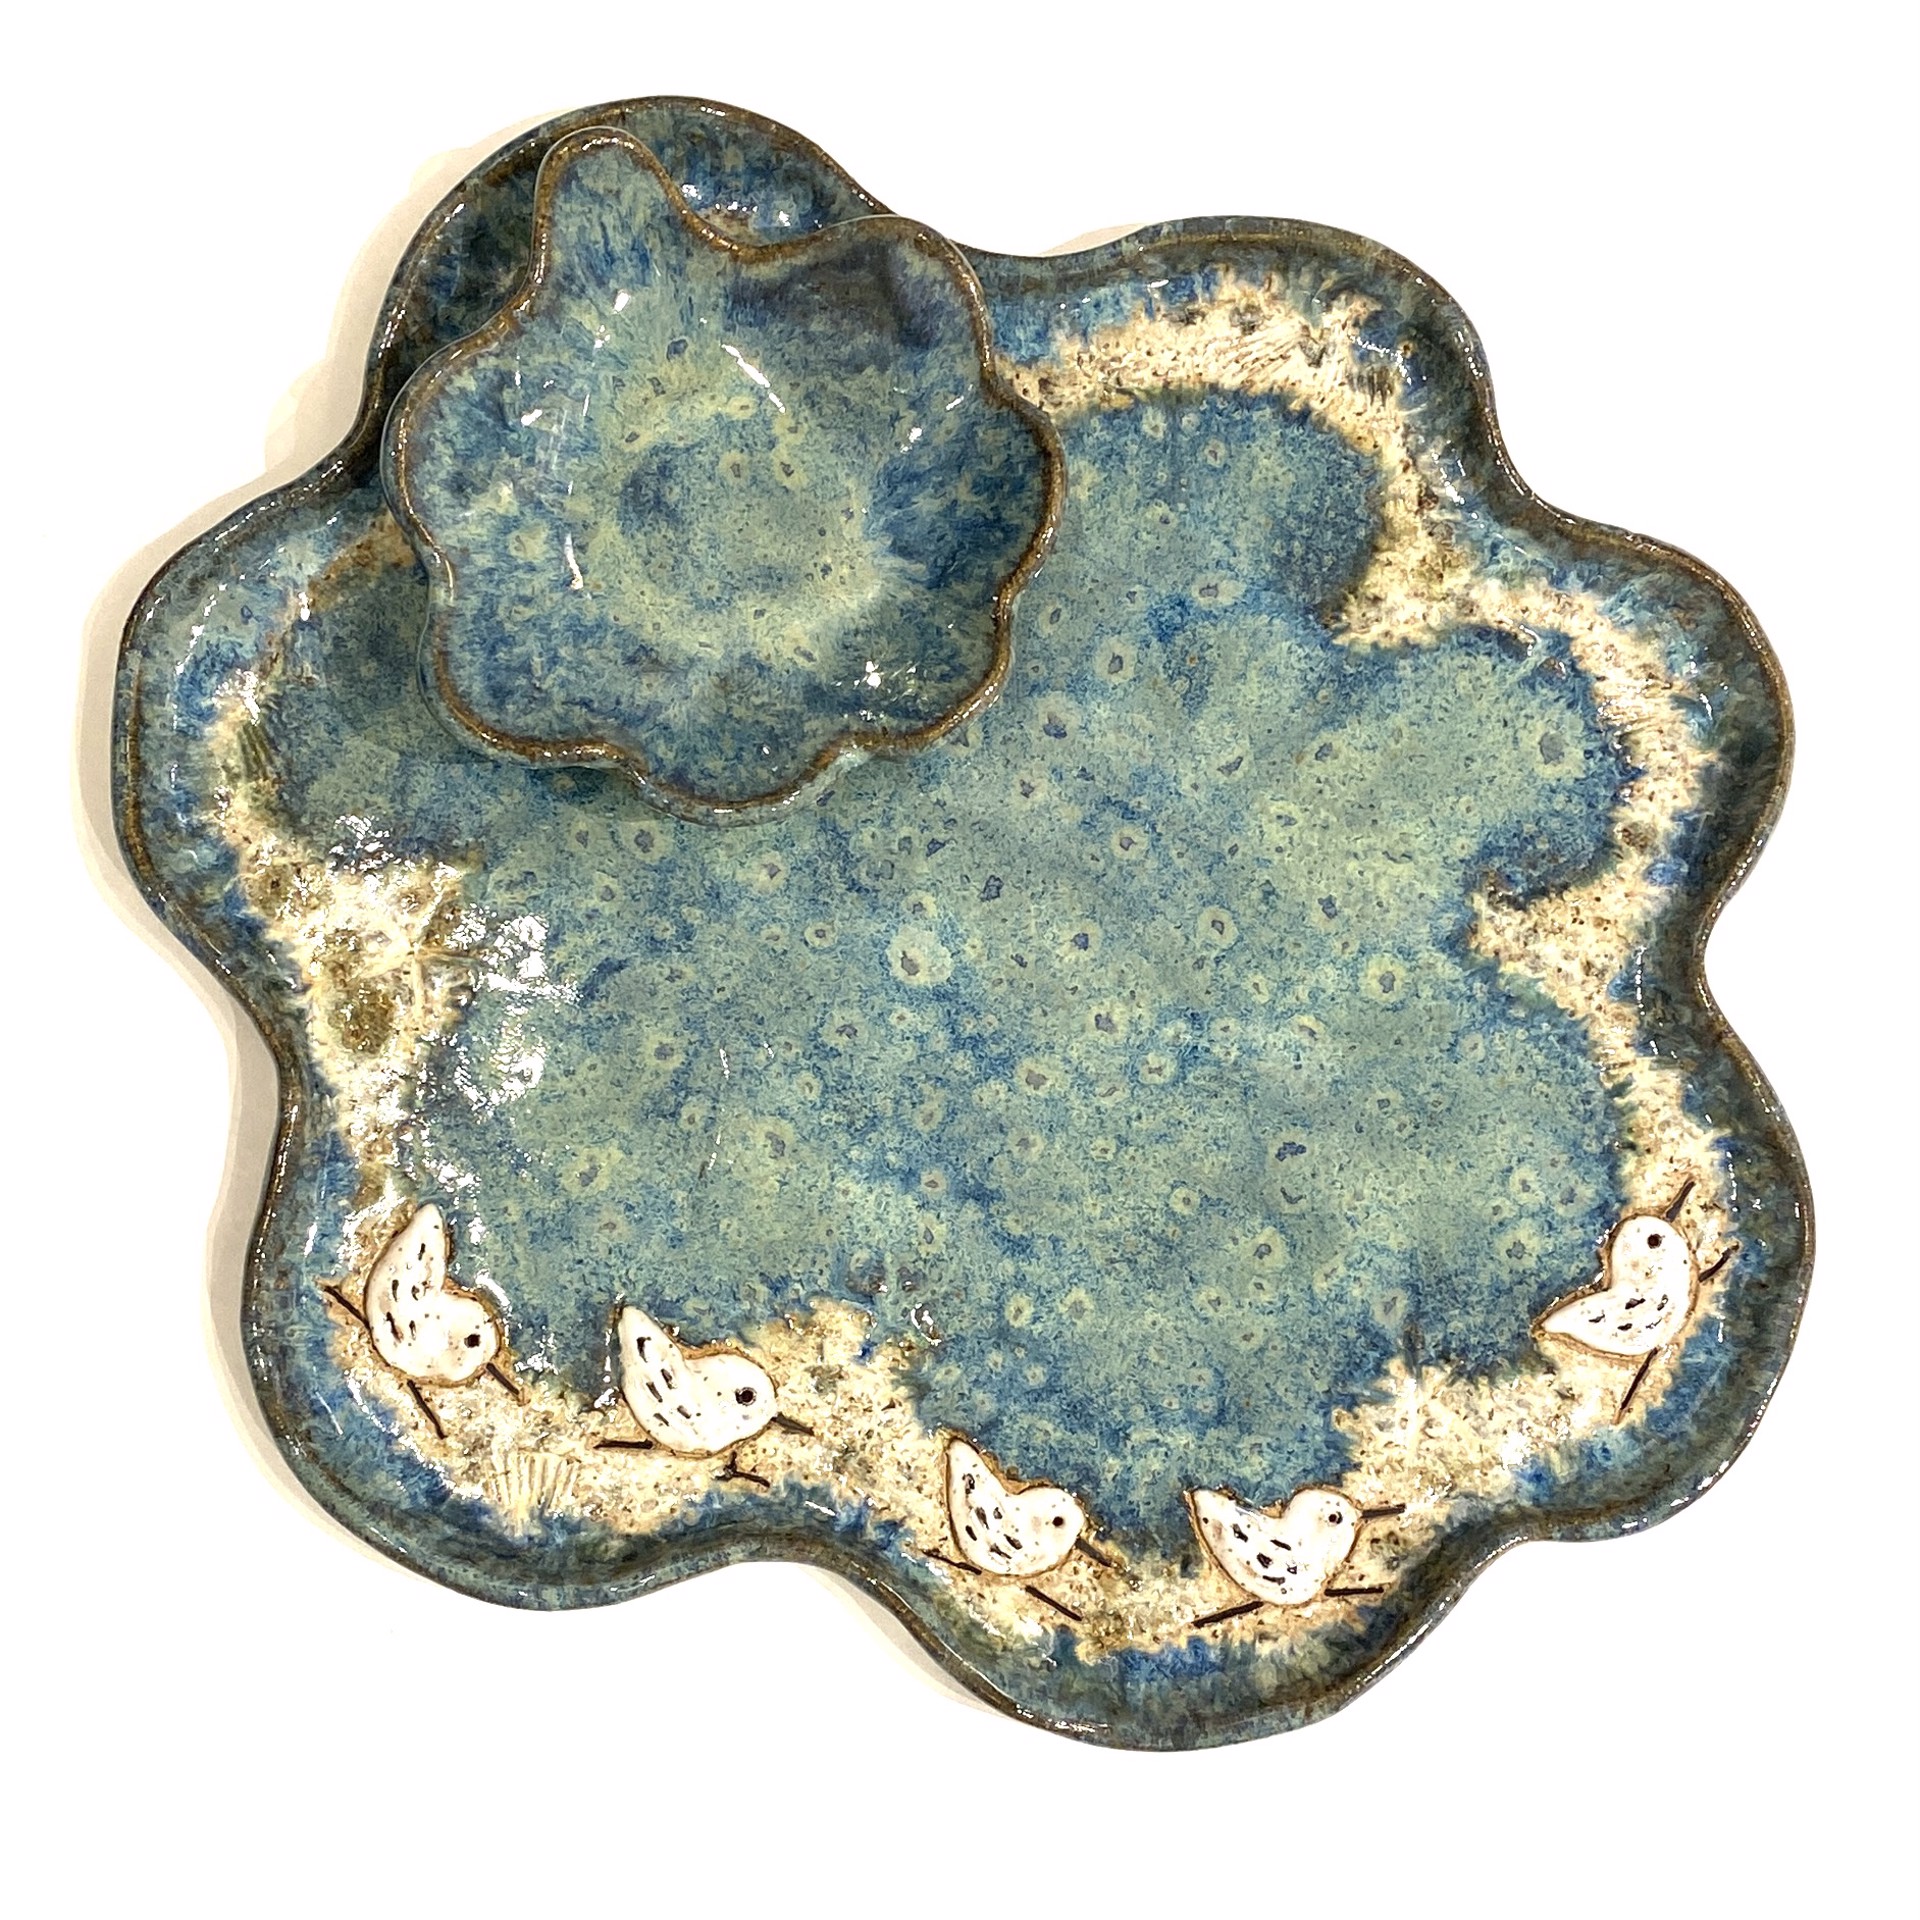 Large Chip N Dip with Five Sandpipers (Blue Glaze) by Jim & Steffi Logan